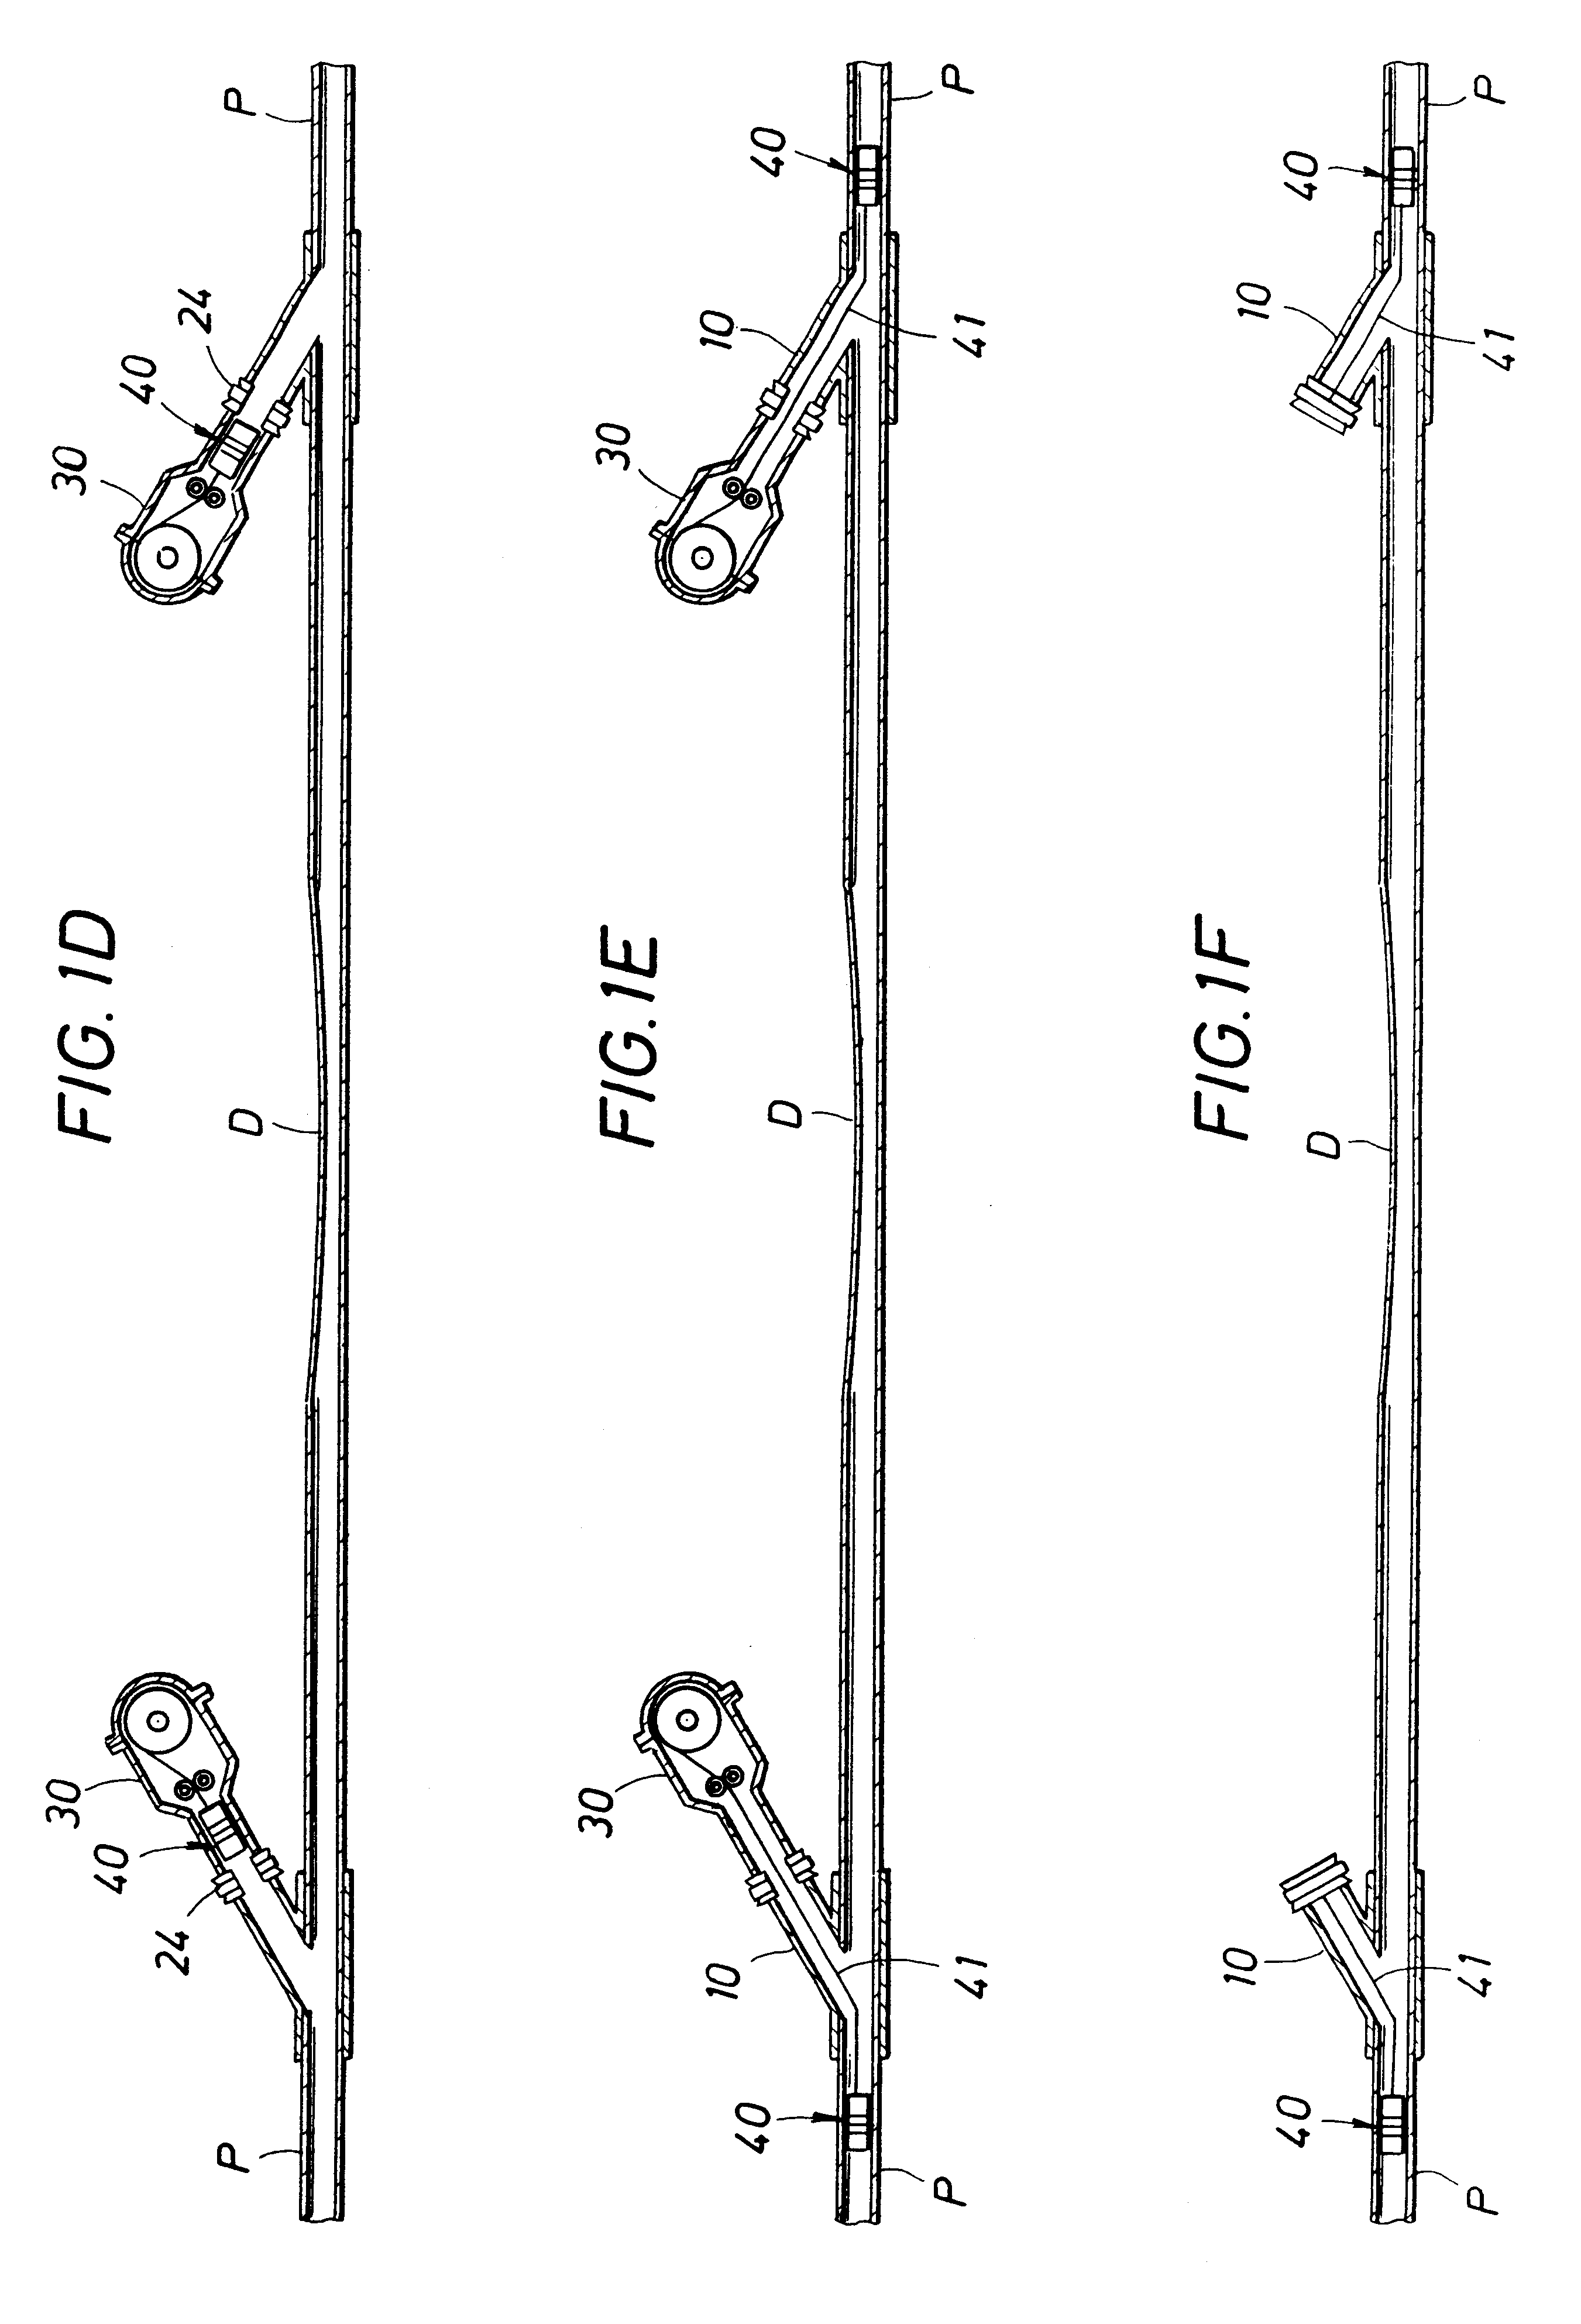 Method and apparatus for replacing damaged section of a subsea pipeline without loss of product or entry of seawater